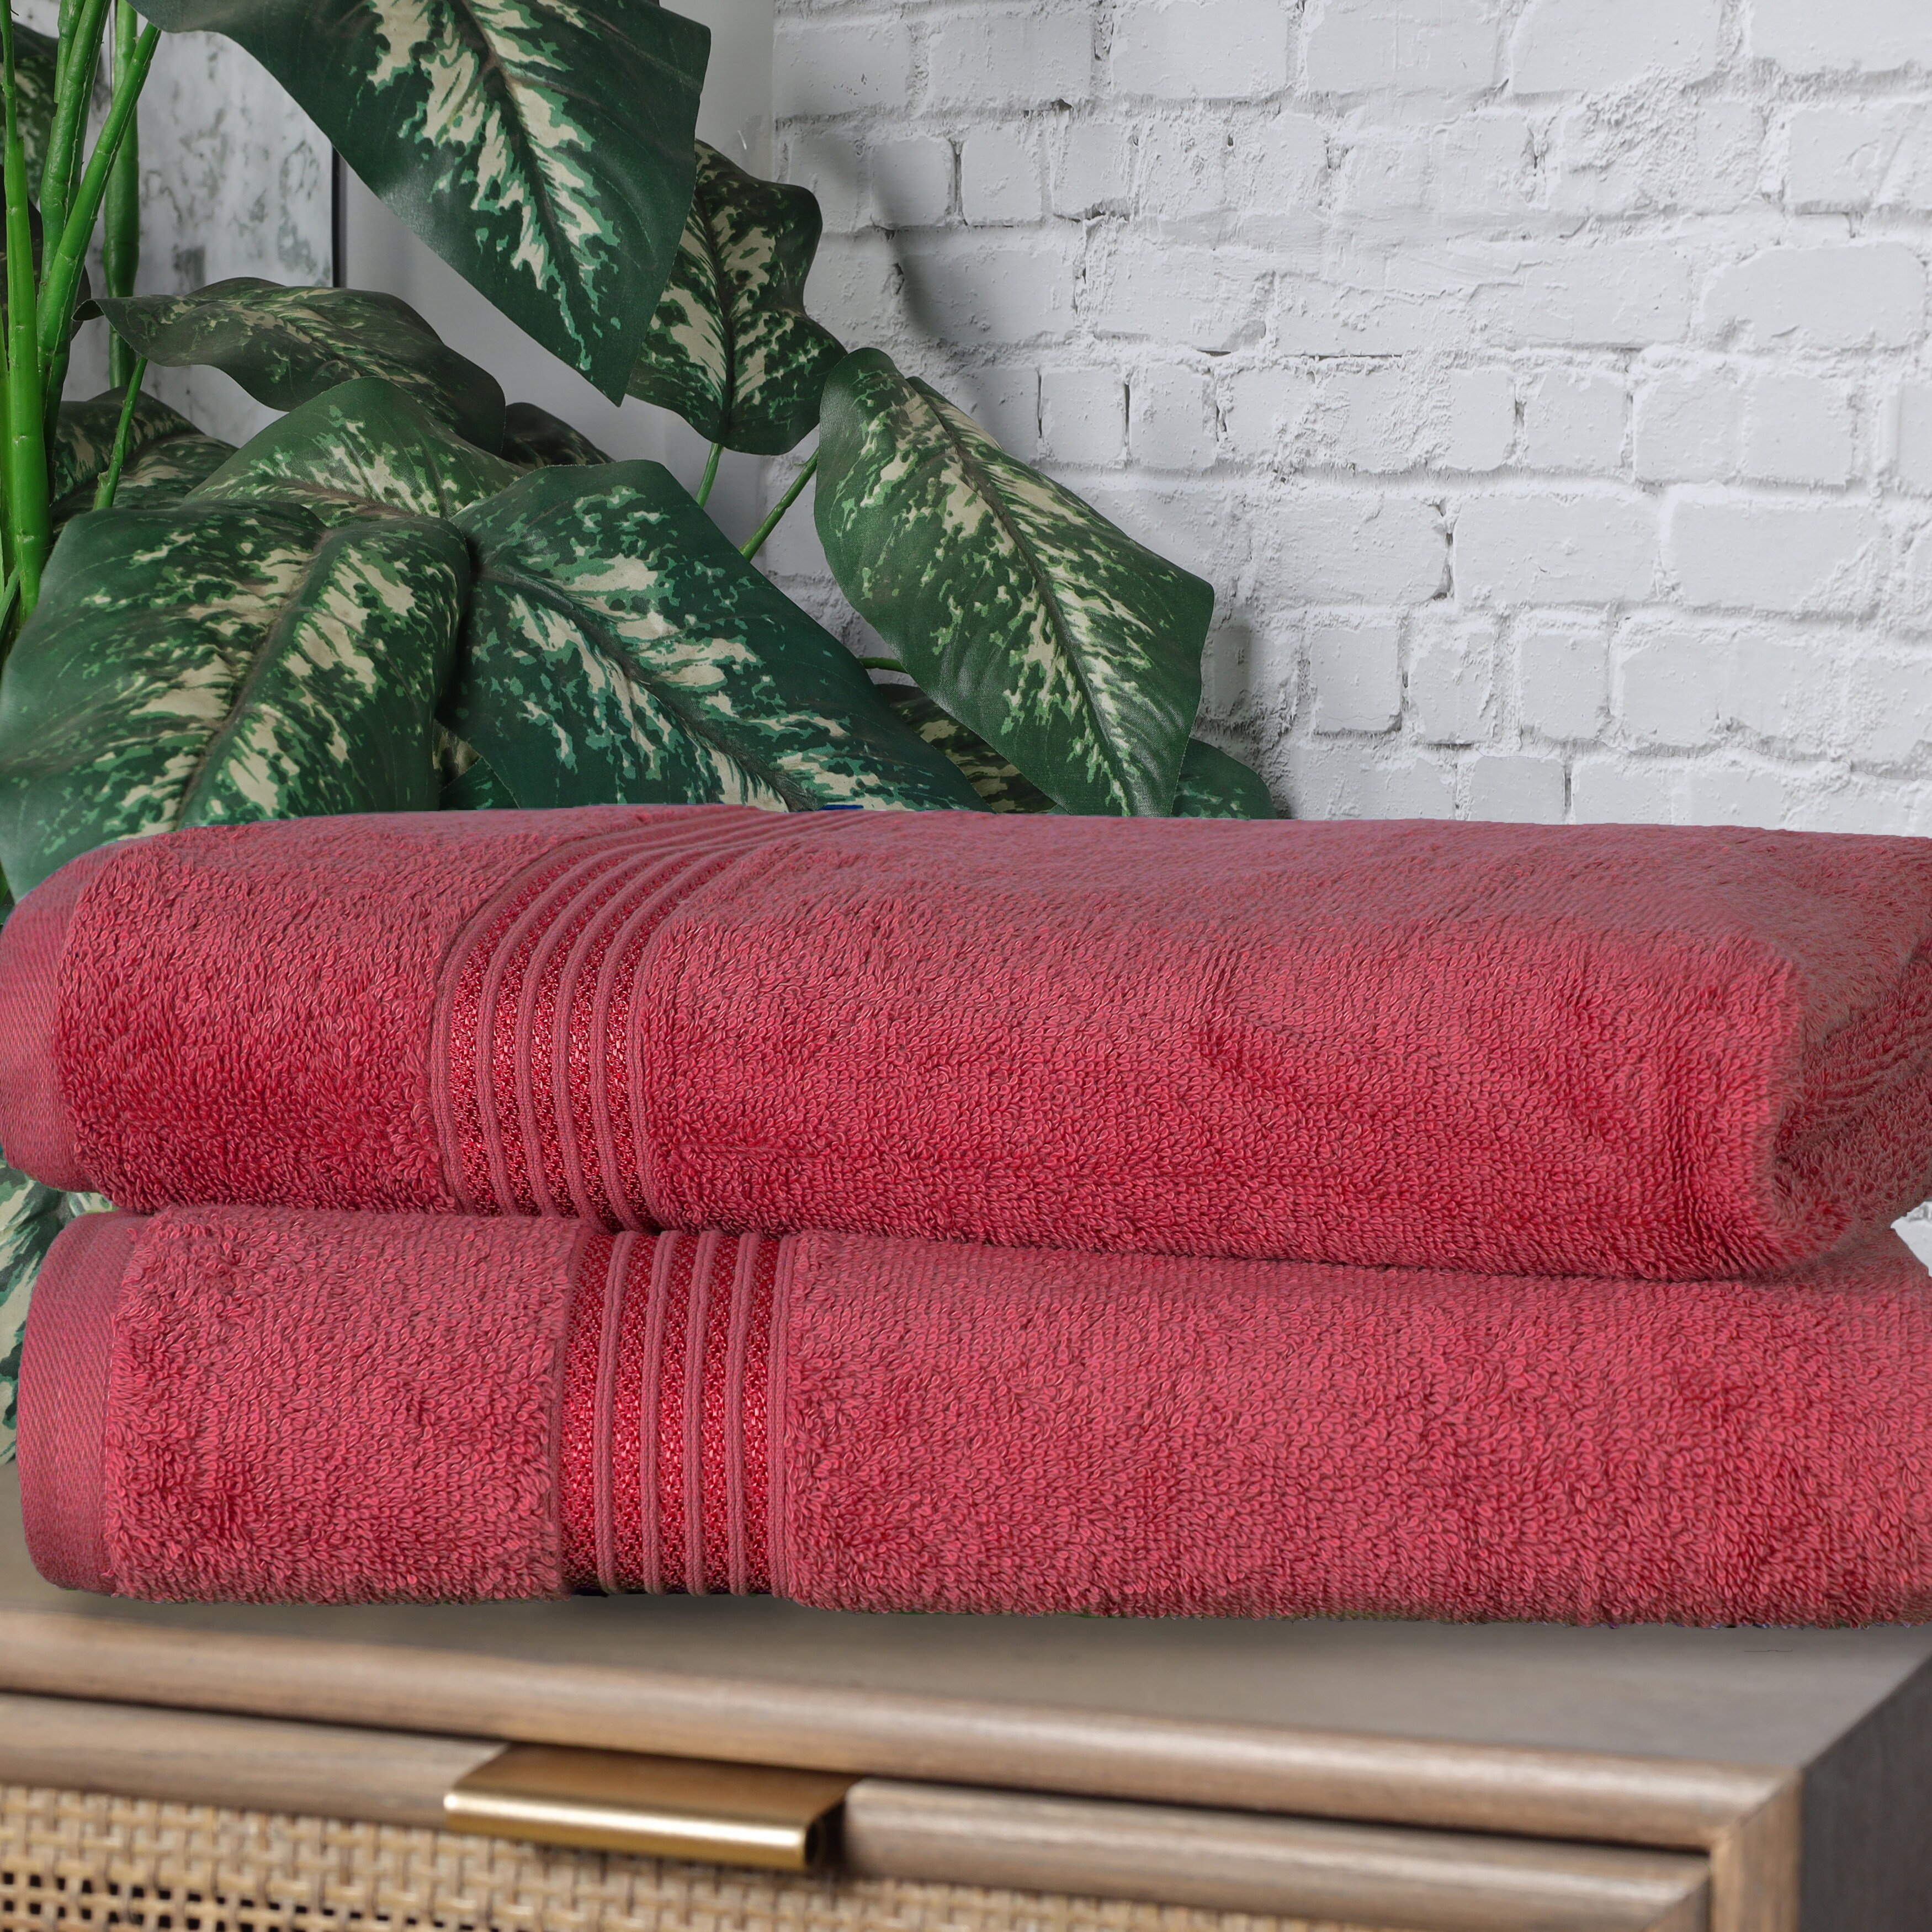 Aten Homeware Luxury Egyptian Cotton Bath Towels Extra Large - 600 GSM 2 Pieces of 26x54 Inches Bath Sheets - Highly Absorbent and Quick Dry Towel